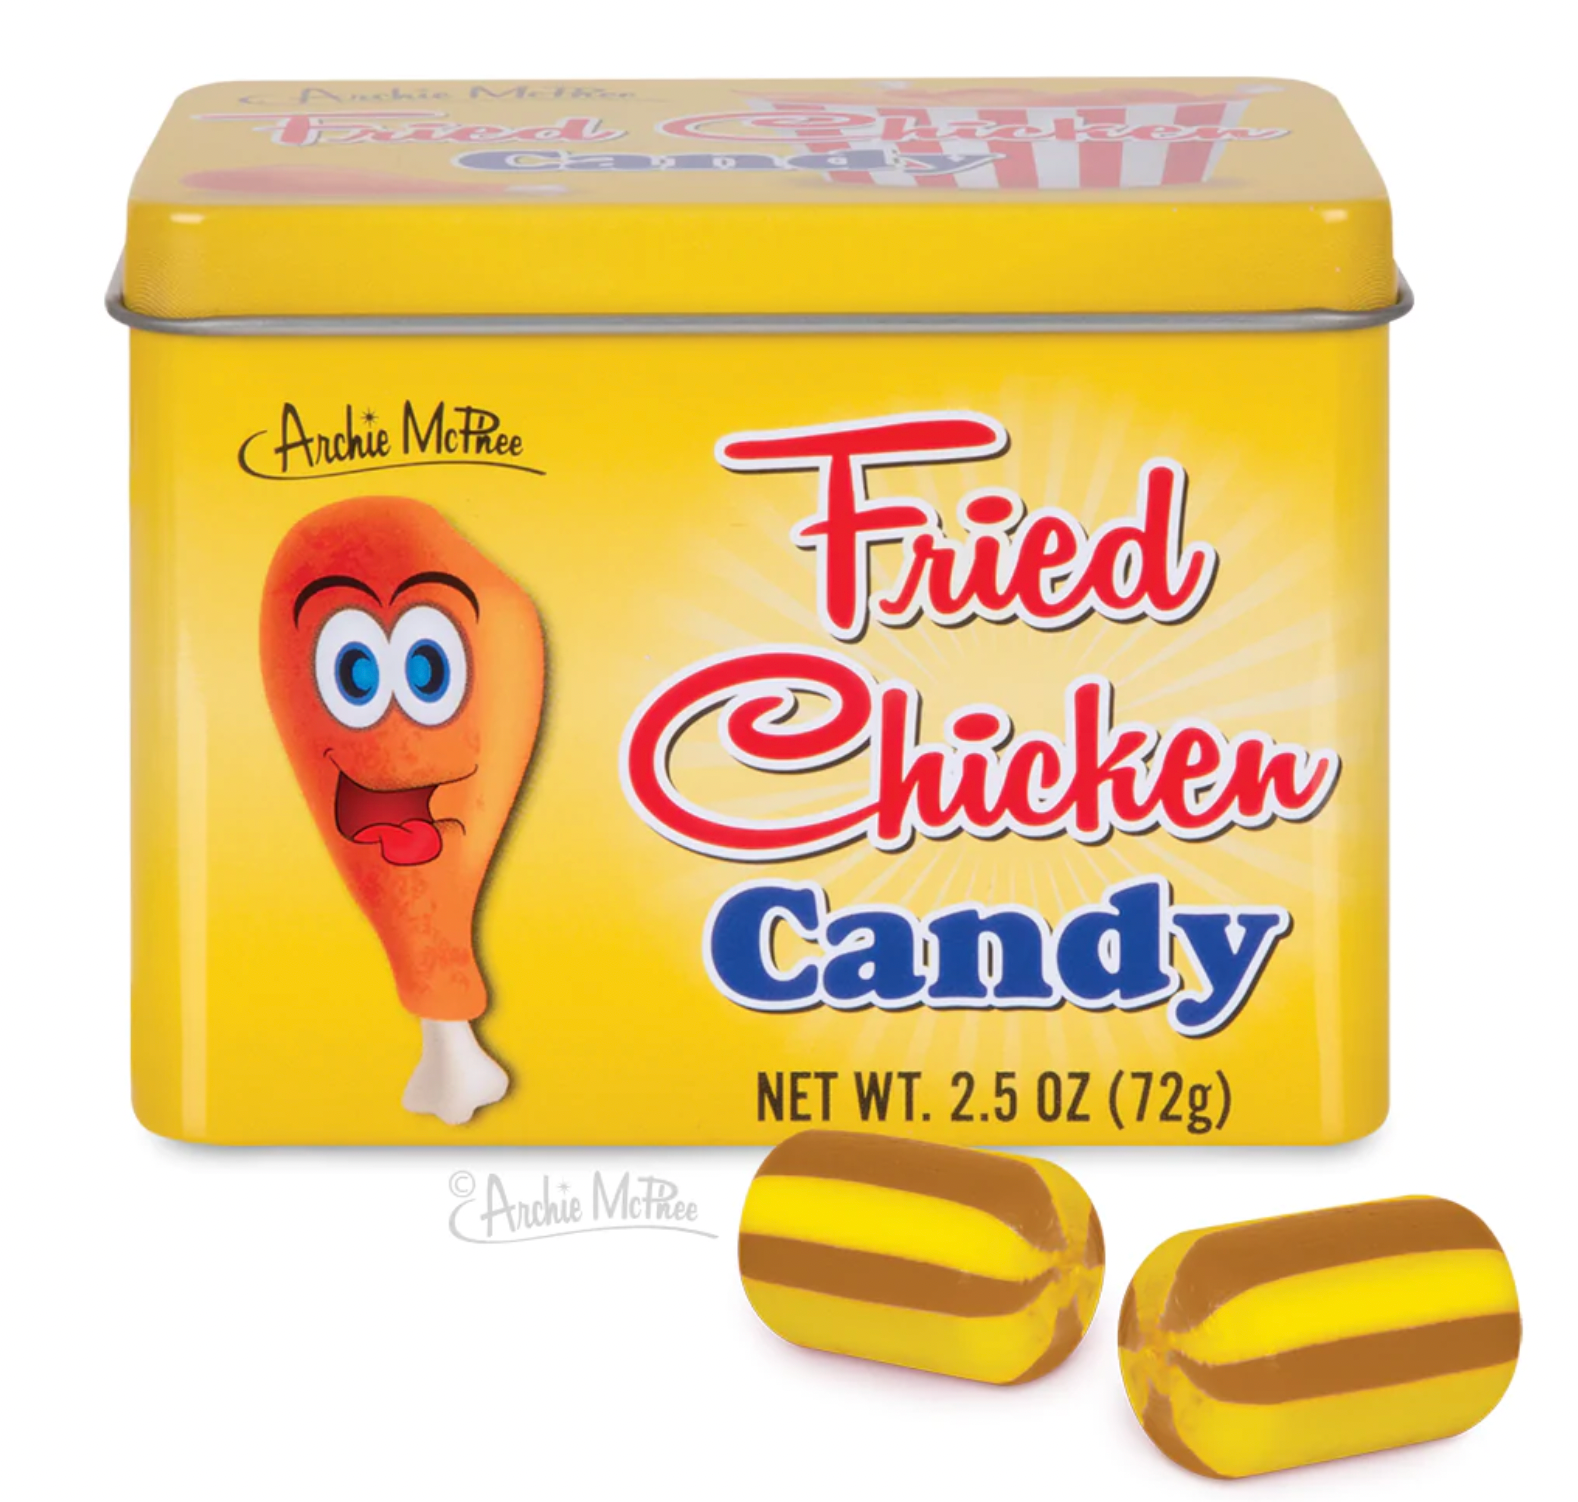 Fried Chicken Candy In Tin